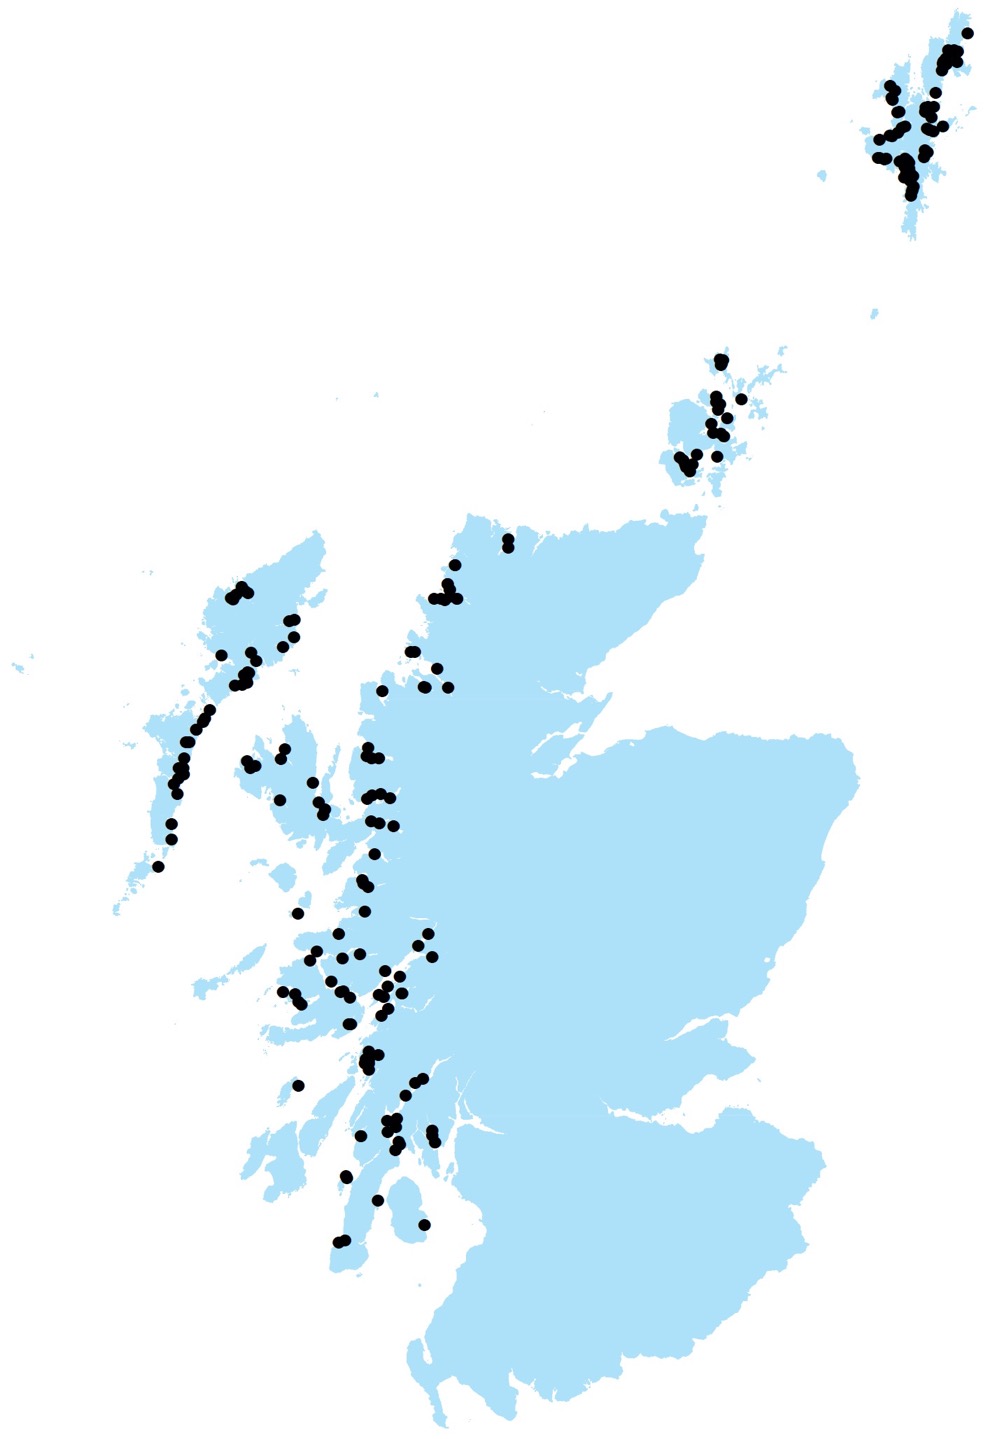 Figure 3: The distribution of active Atlantic salmon production sites in 2017